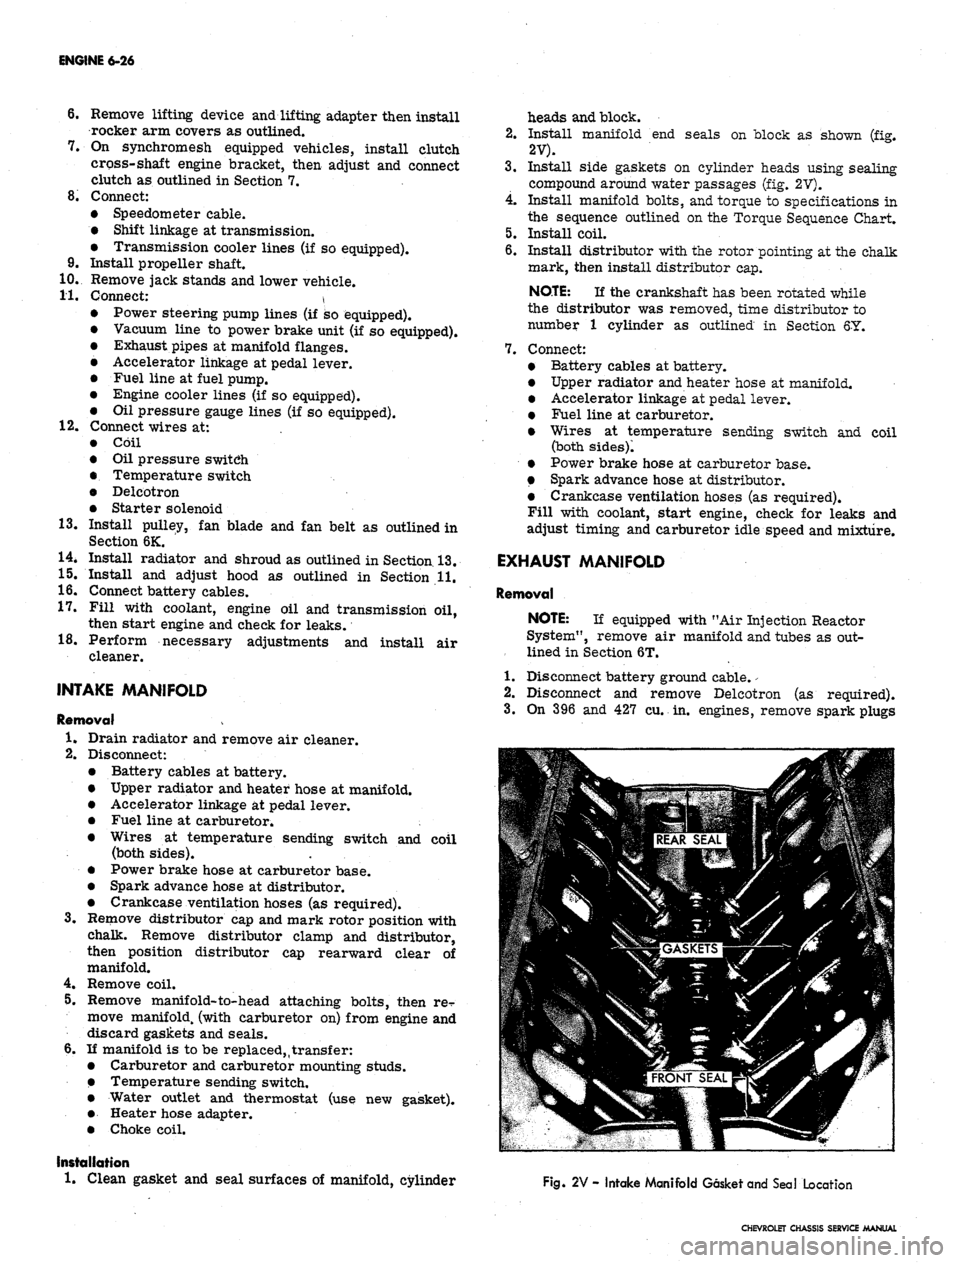 CHEVROLET CAMARO 1967 1.G Chassis Workshop Manual 
ENGINE 6-26

6. Remove lifting device and lifting adapter then install

rocker arm covers as outlined.

7.
 On synchromesh equipped vehicles, install clutch

cross-shaft engine bracket, then adjust a